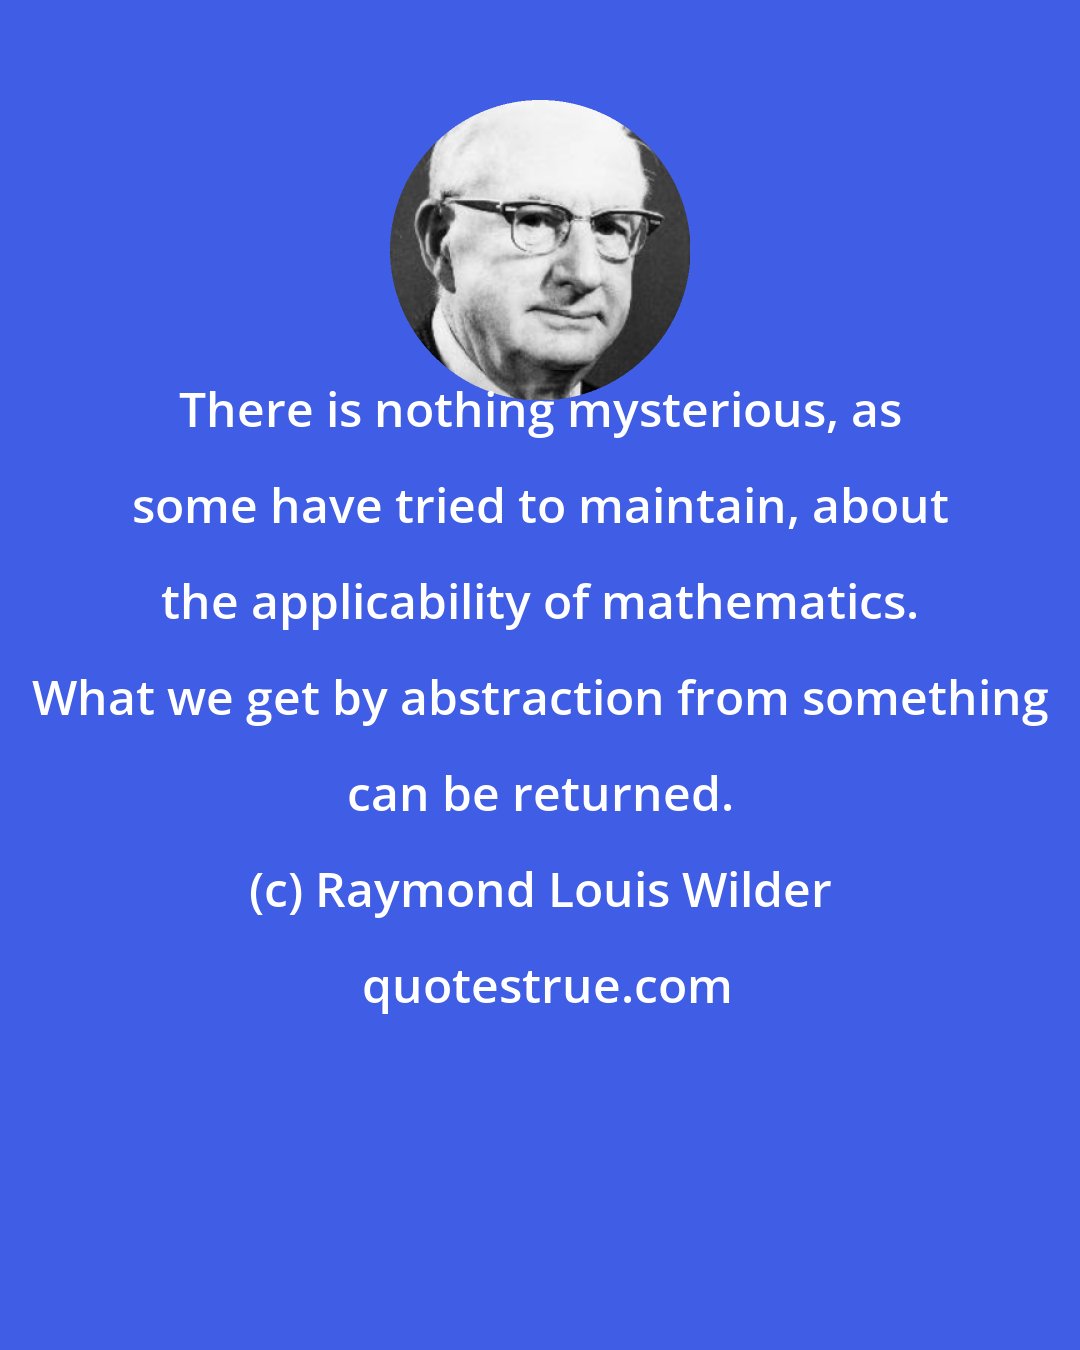 Raymond Louis Wilder: There is nothing mysterious, as some have tried to maintain, about the applicability of mathematics. What we get by abstraction from something can be returned.